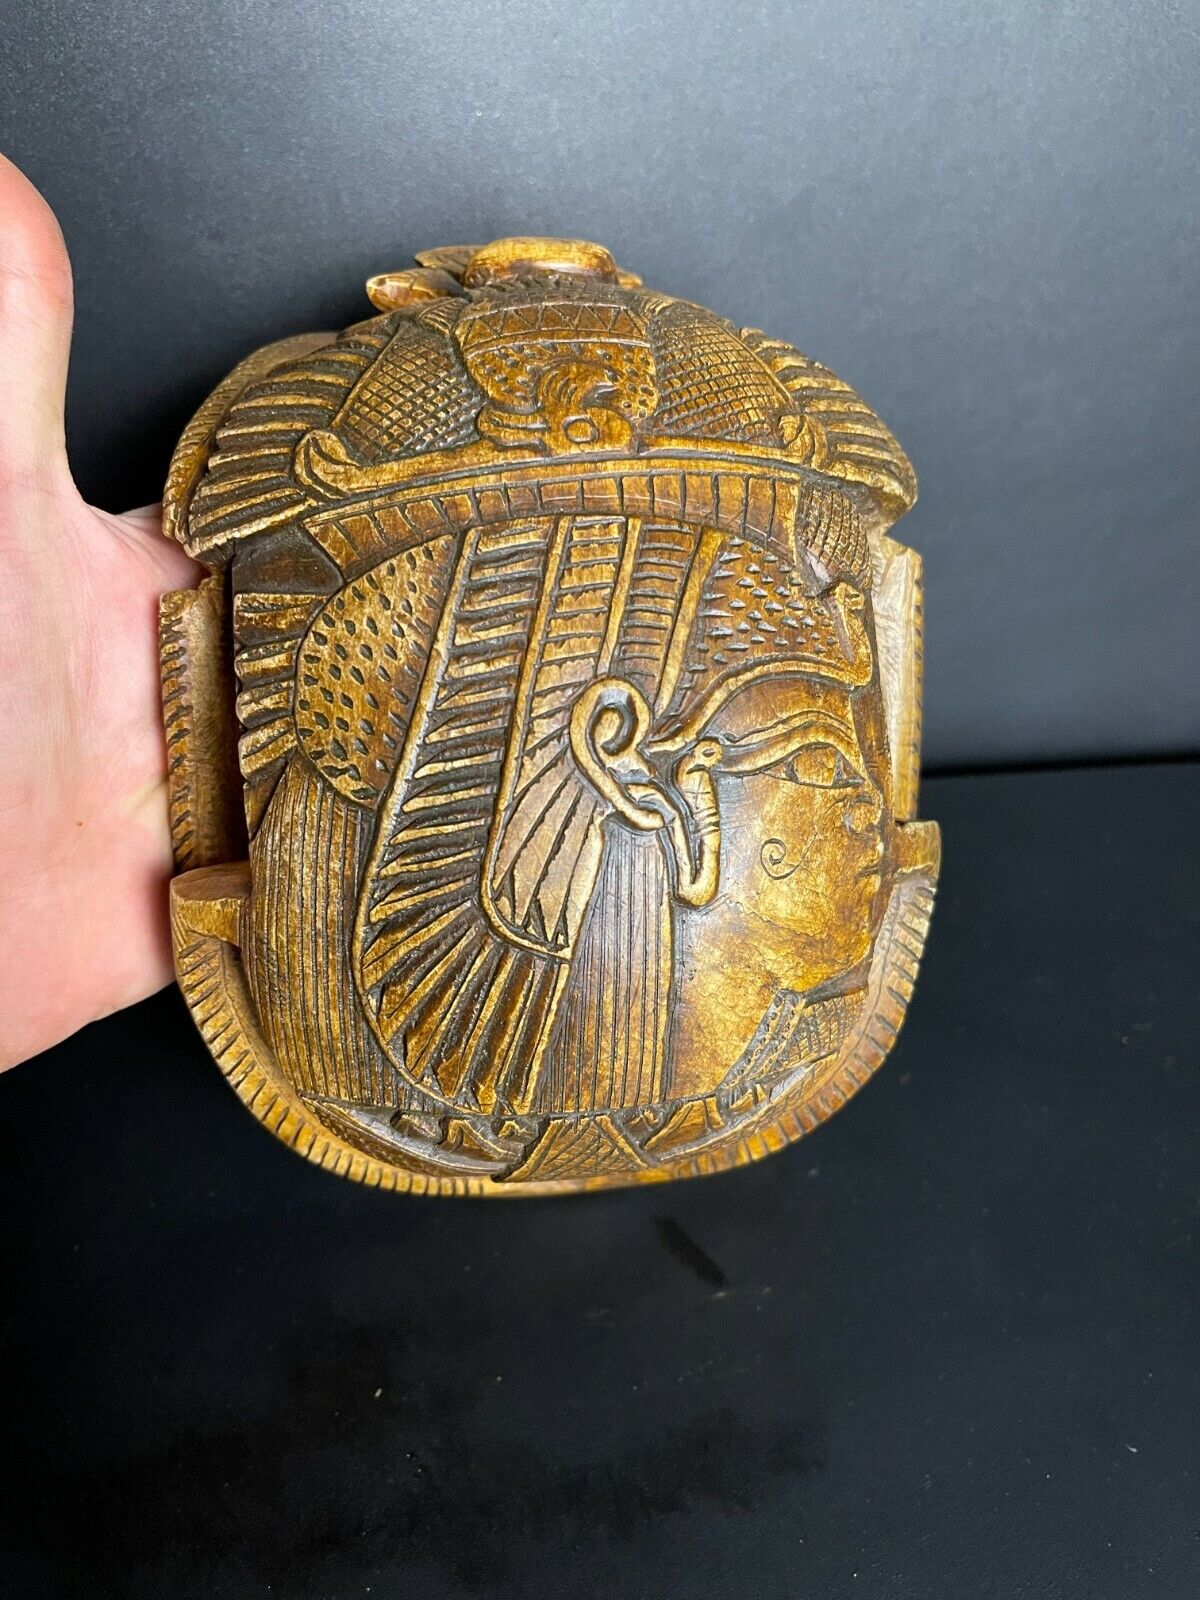 Amazing Giant Egyptian scarab with the face of Cleopatra & Egyptian decorations